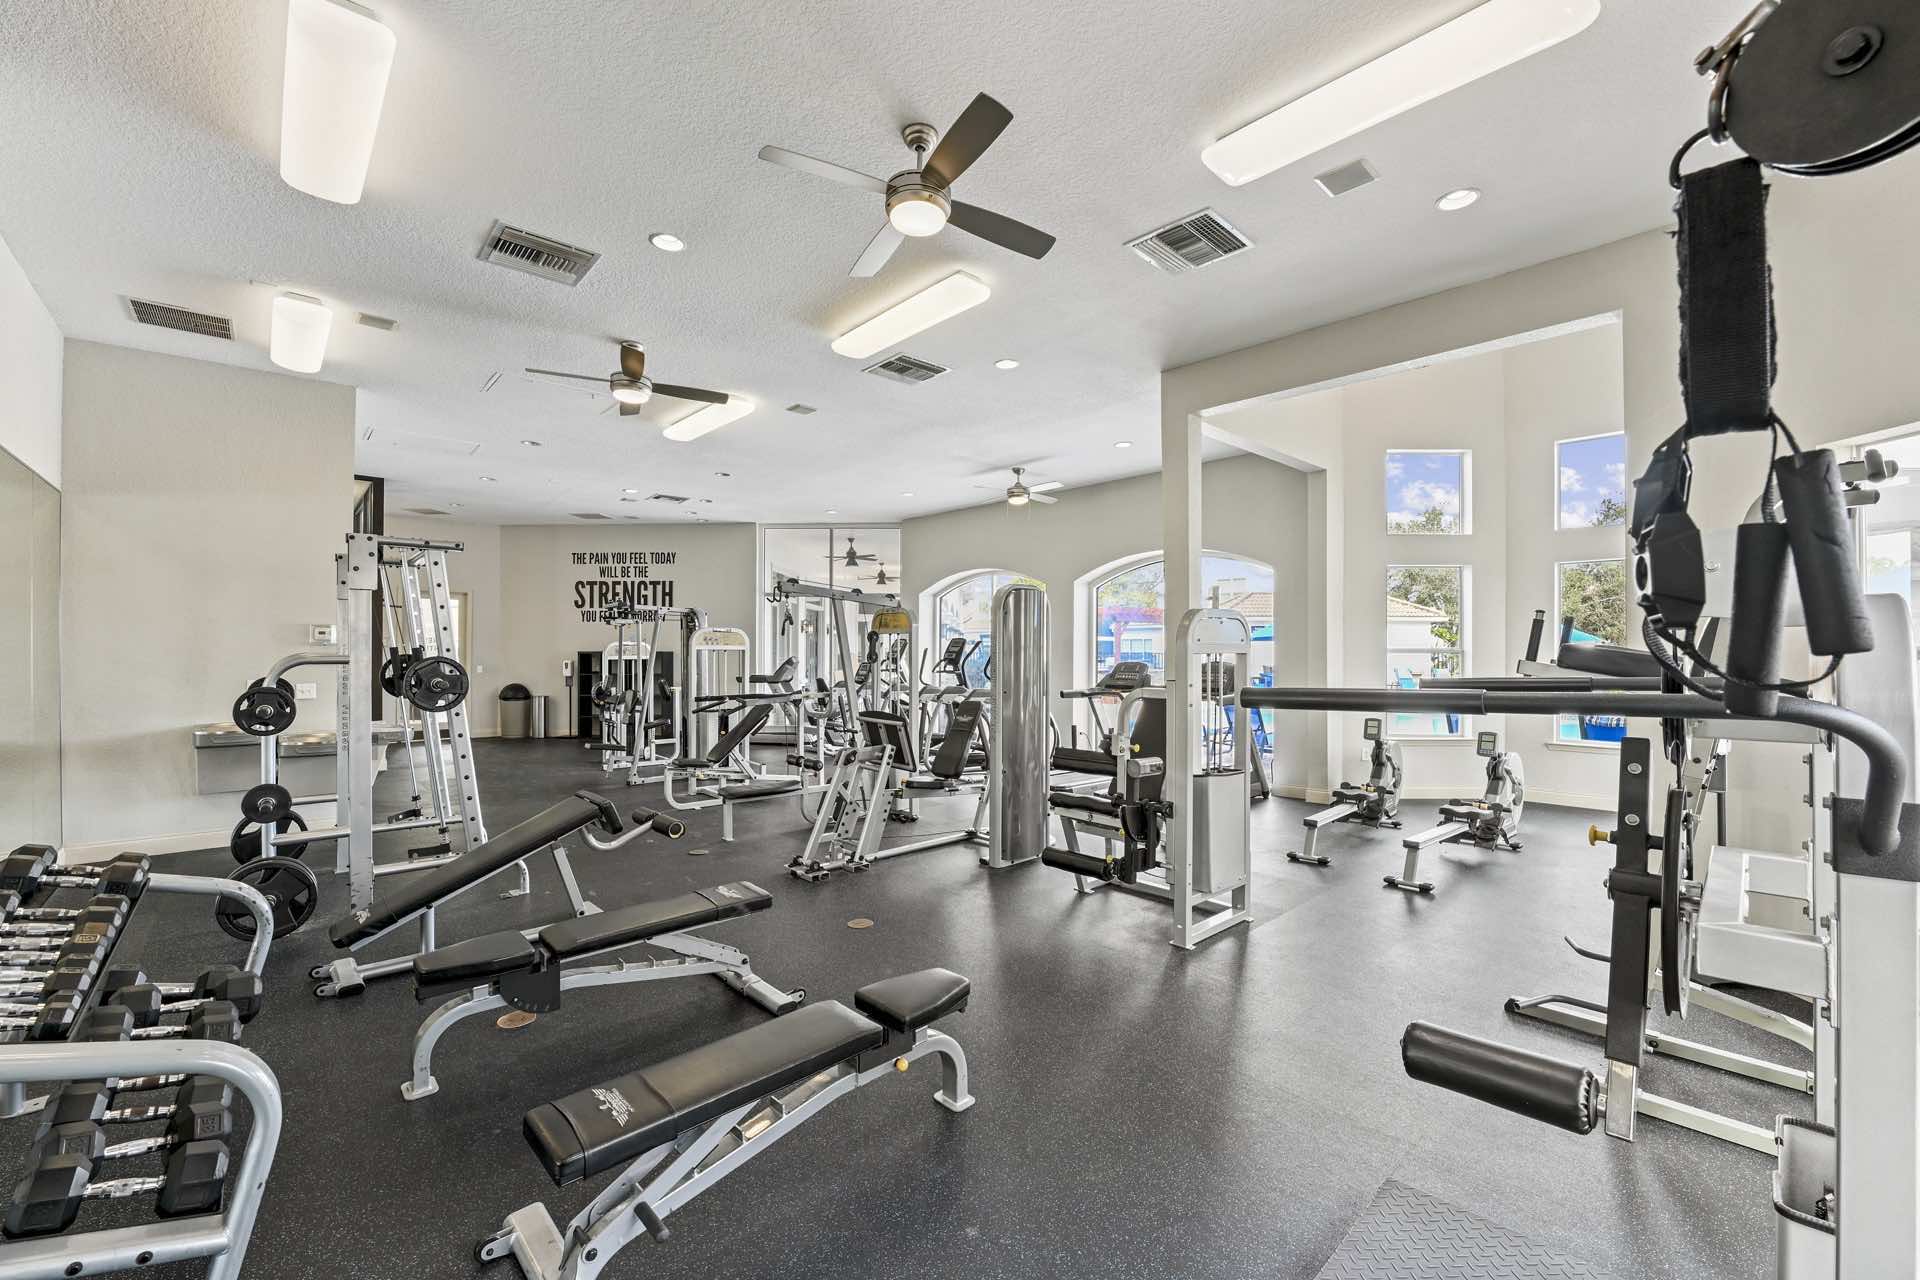 Weight lifting area of the fitness center